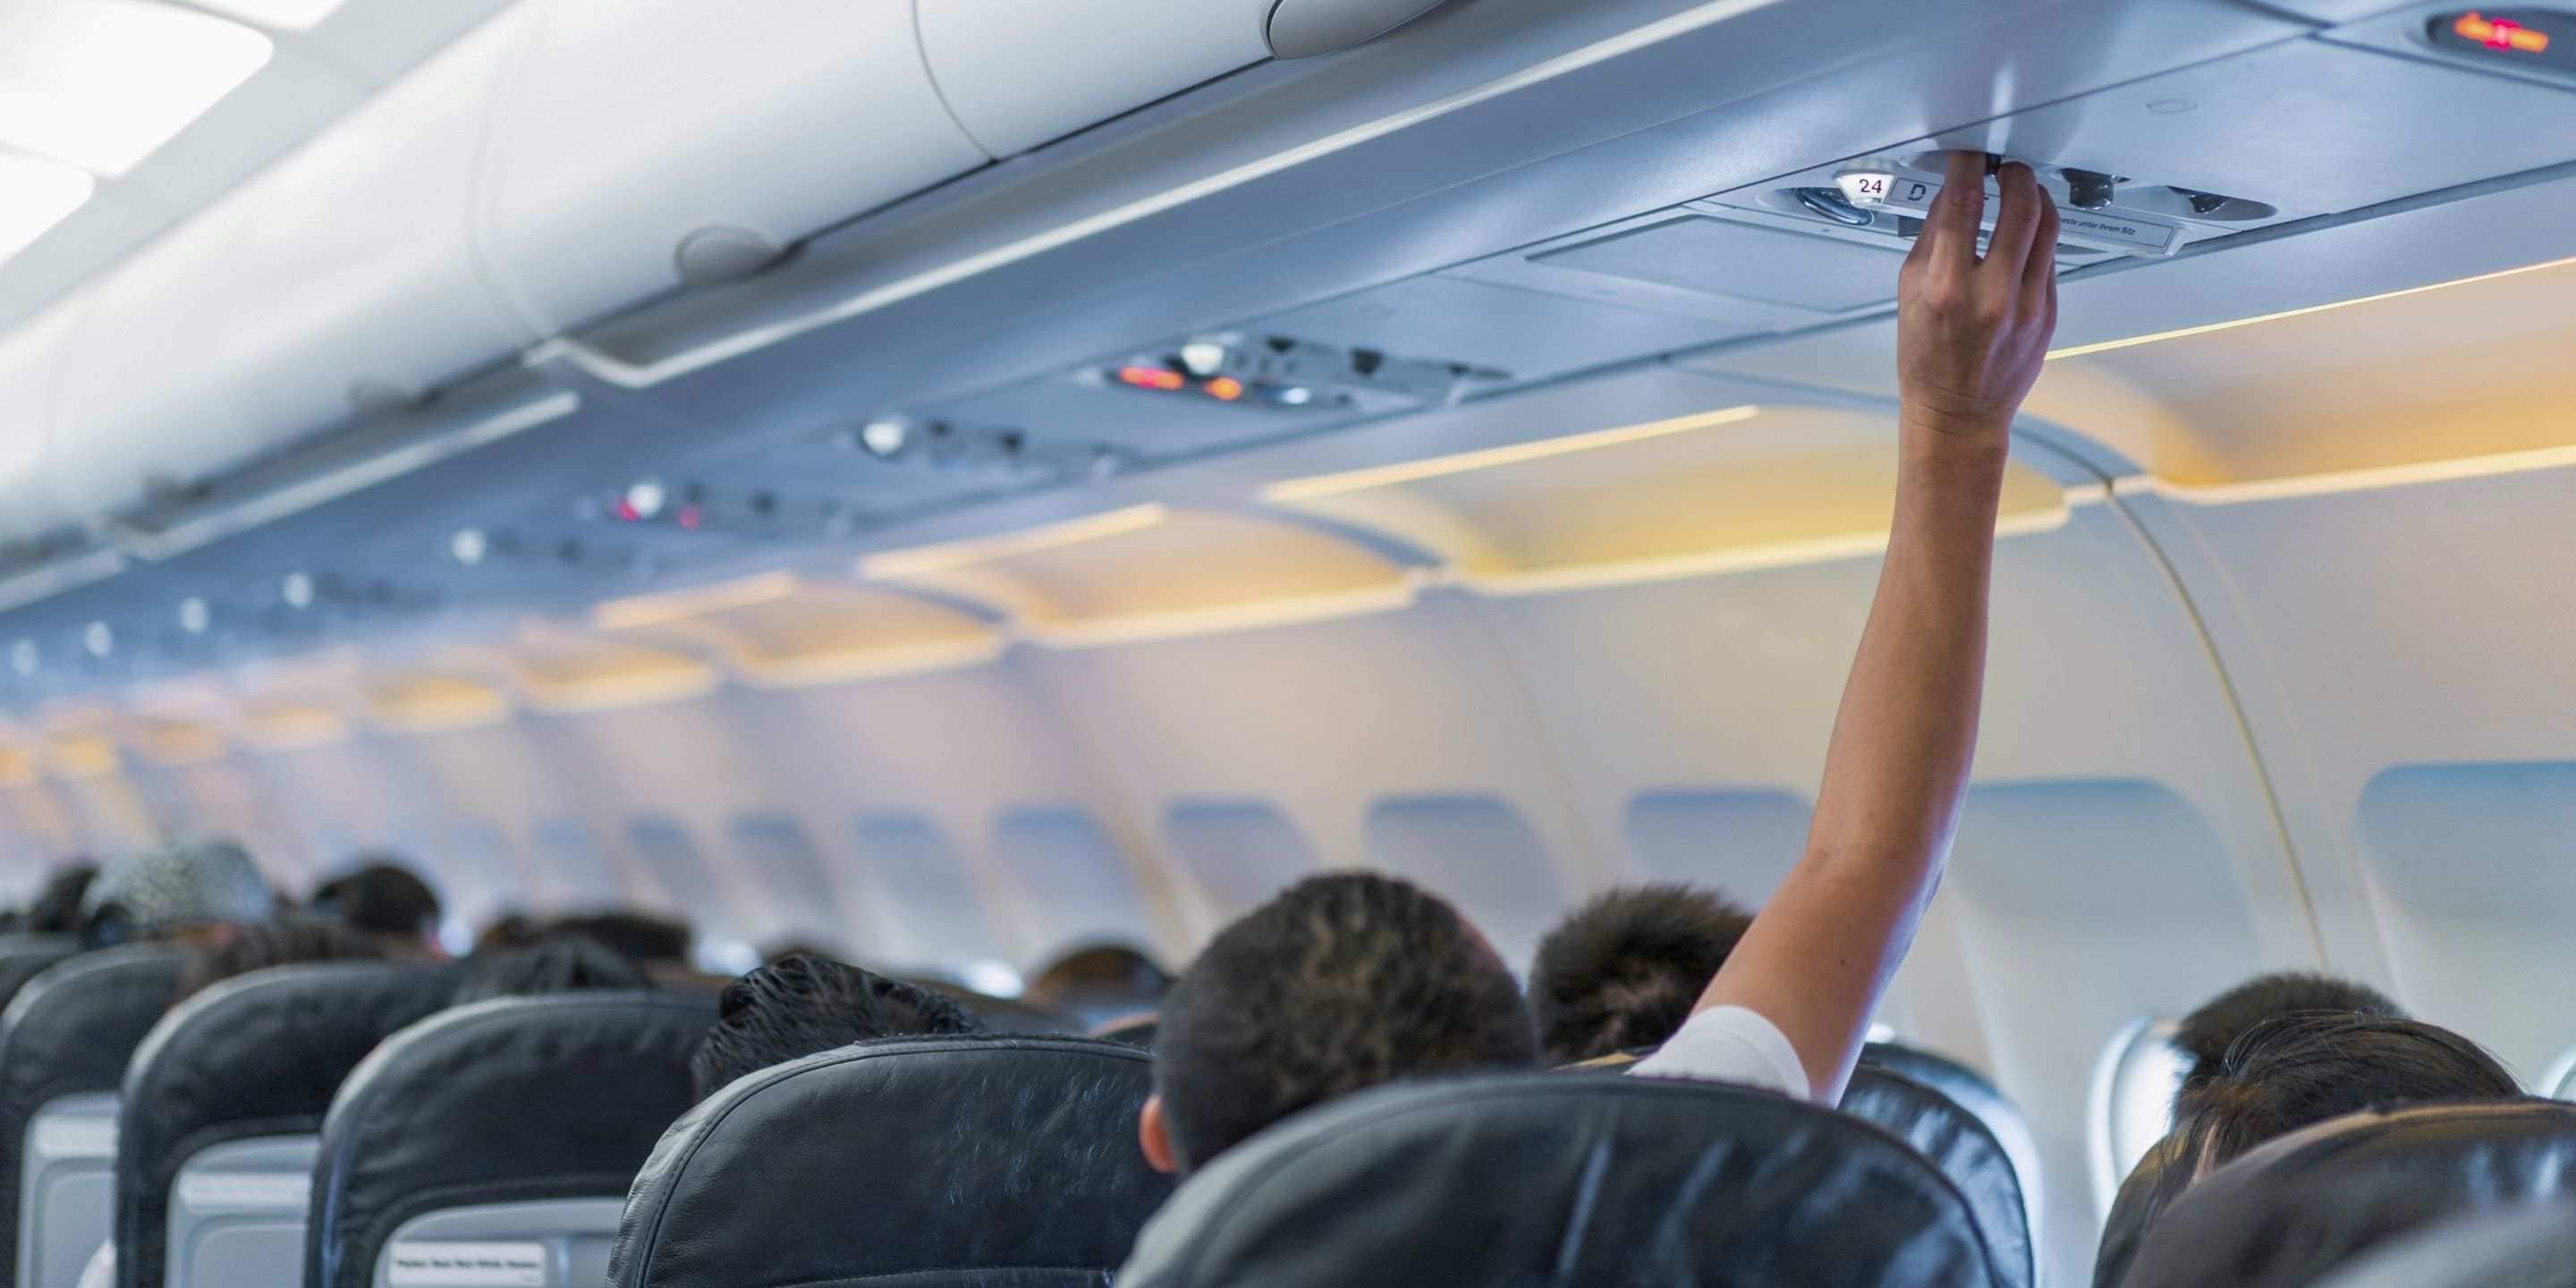 What are air management systems in airplanes and how do they work?